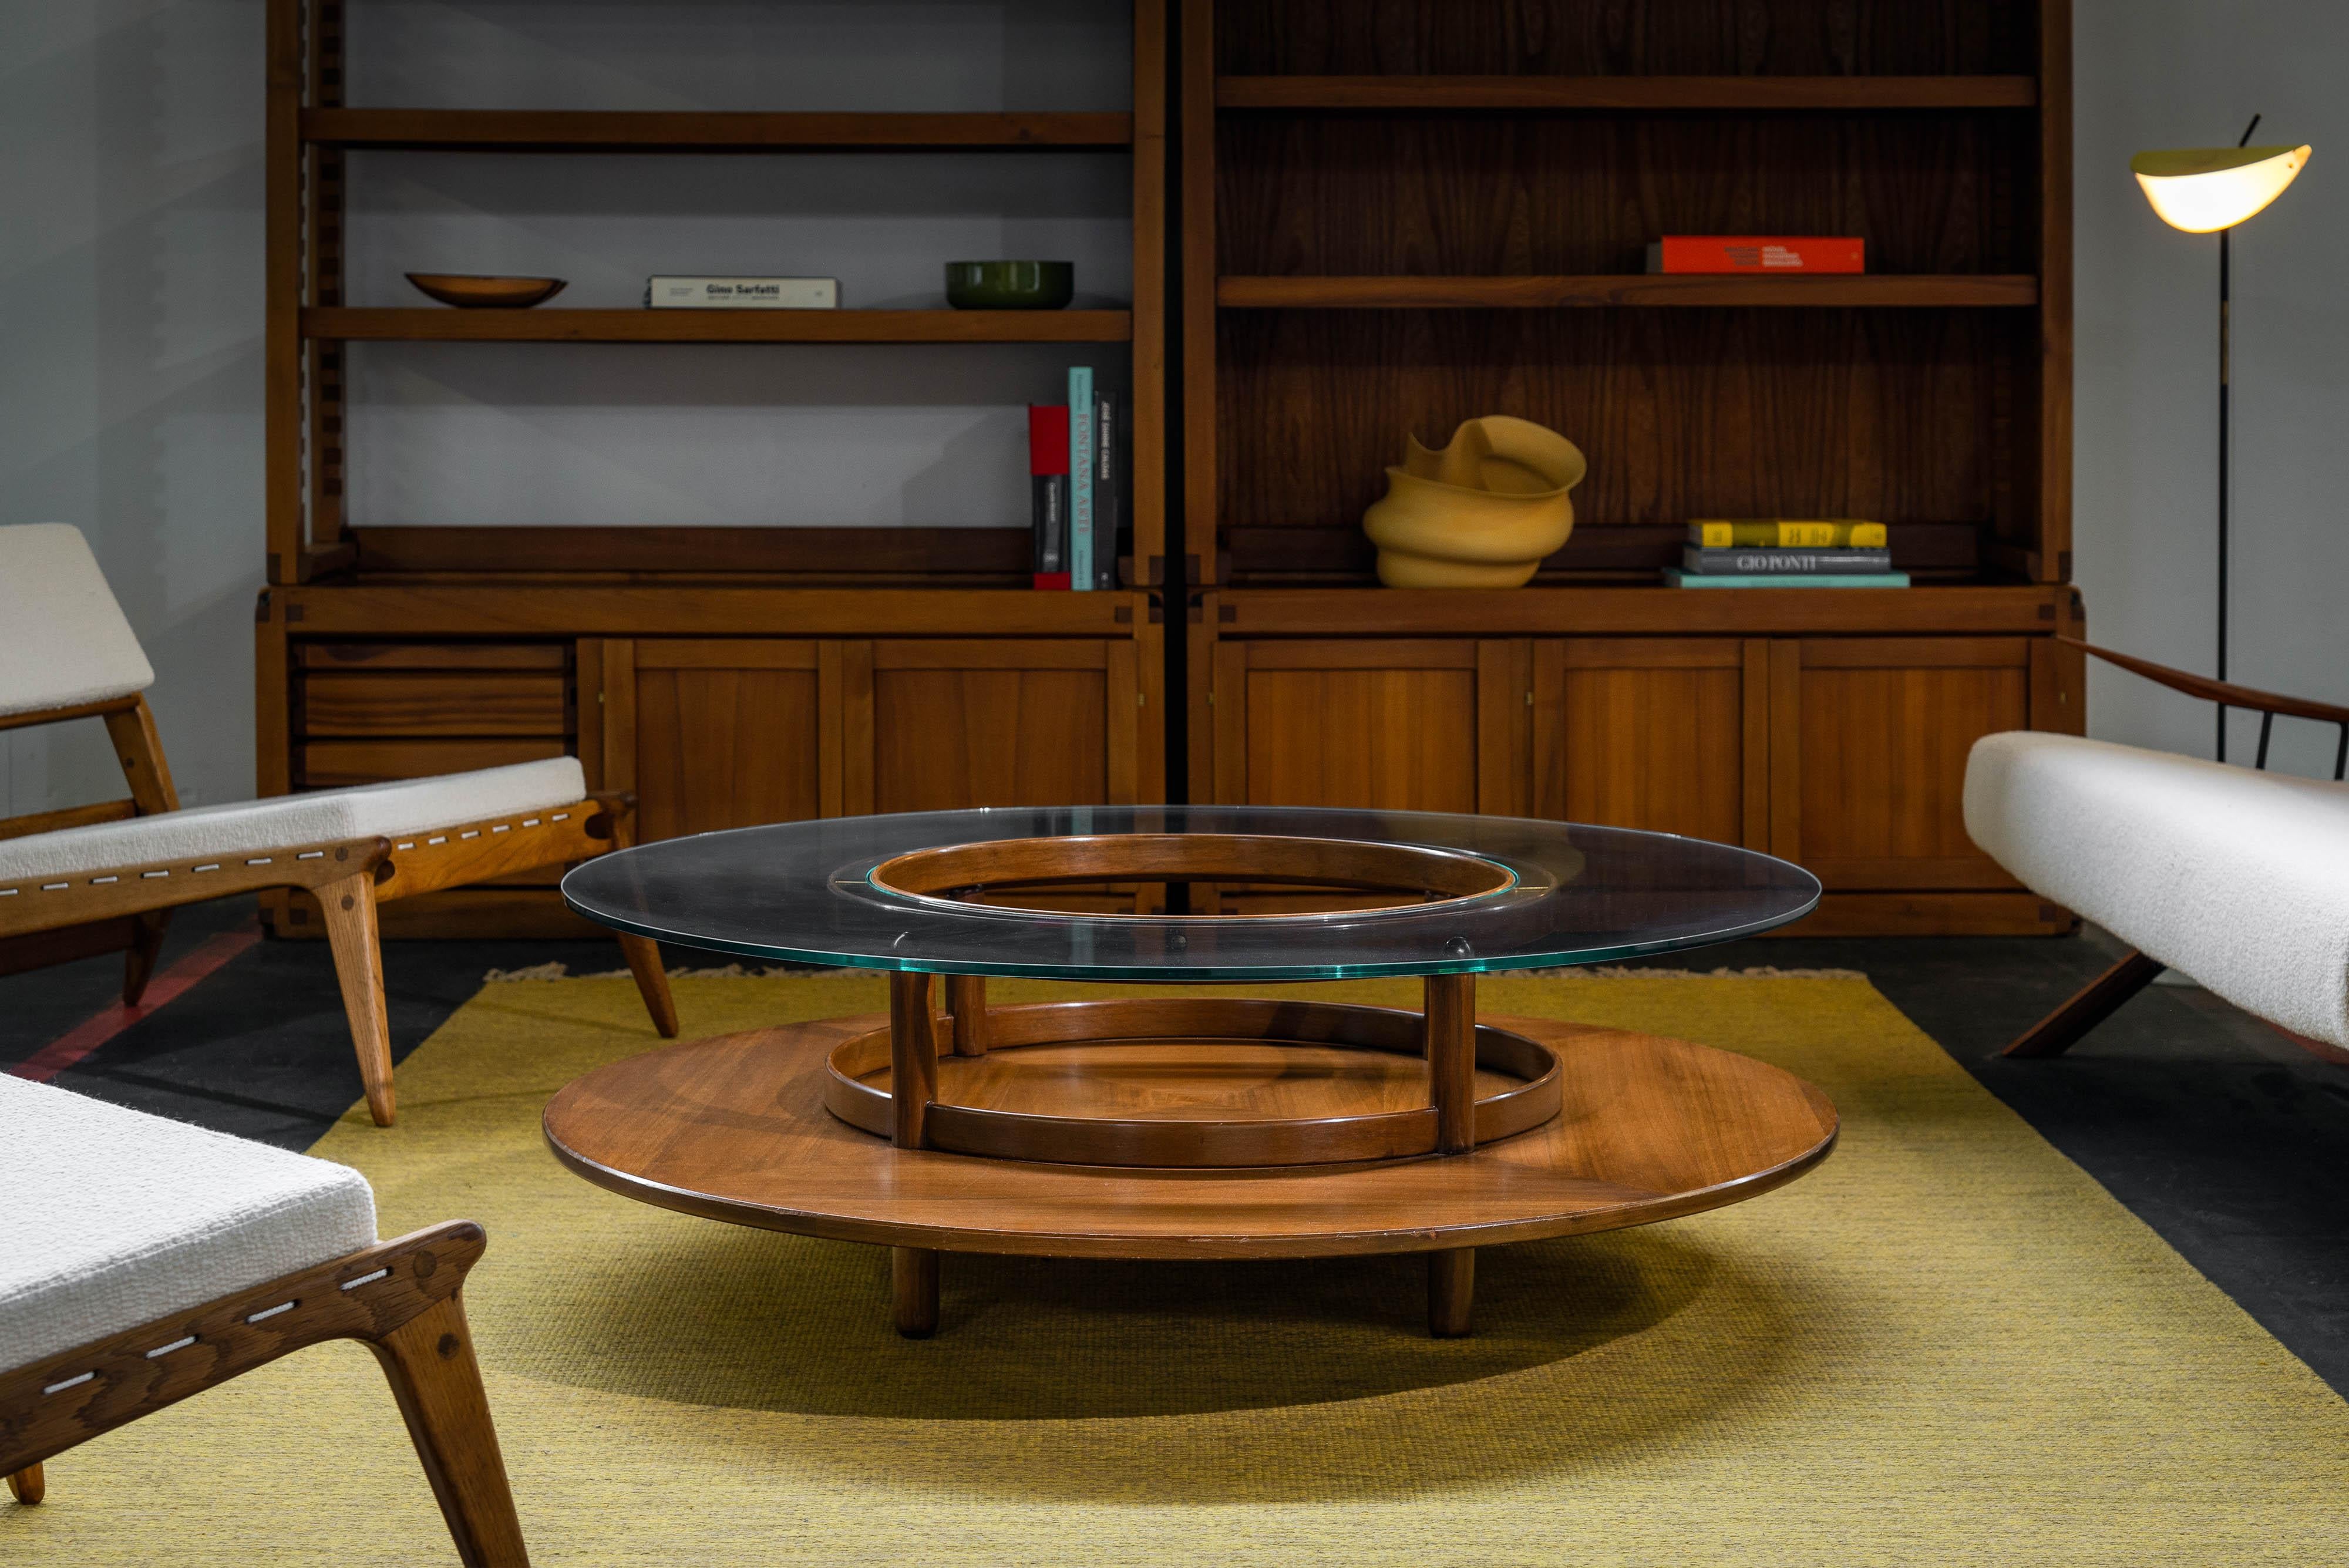 Beautiful coffee table designed by Gianfranco Frattini and manufactured by Cassina in Italy in 1960. Made from rich walnut wood, the table has a warmth and timeless appeal. The addition of refined brass details make it complete. The table consists